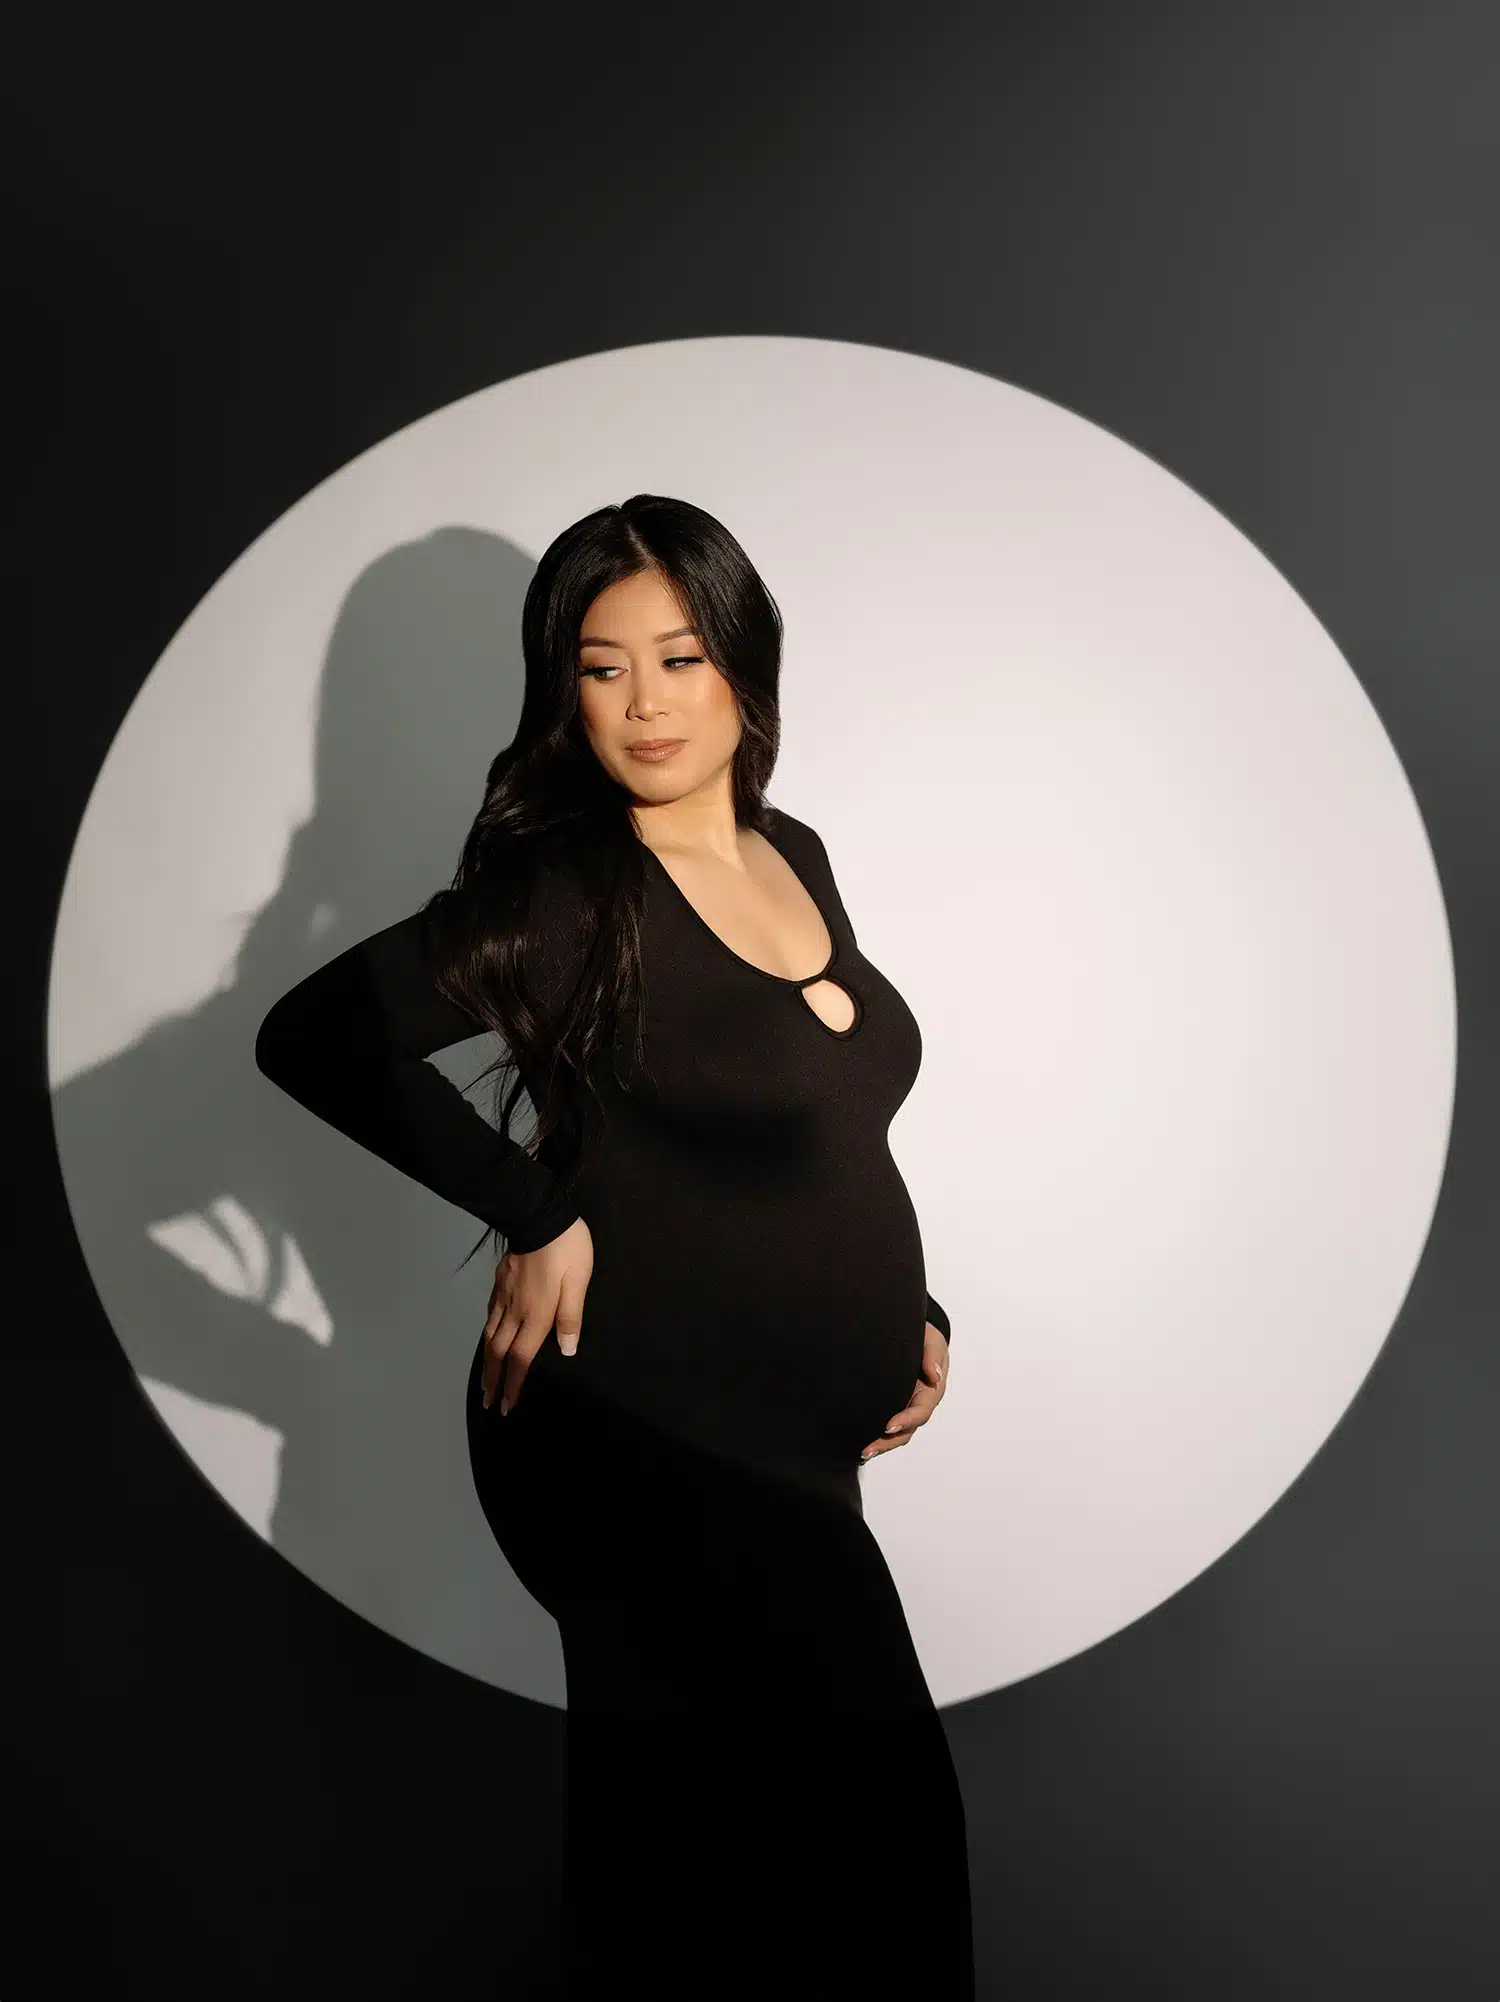 pregnant woman wearing black form-fitted tight black dress